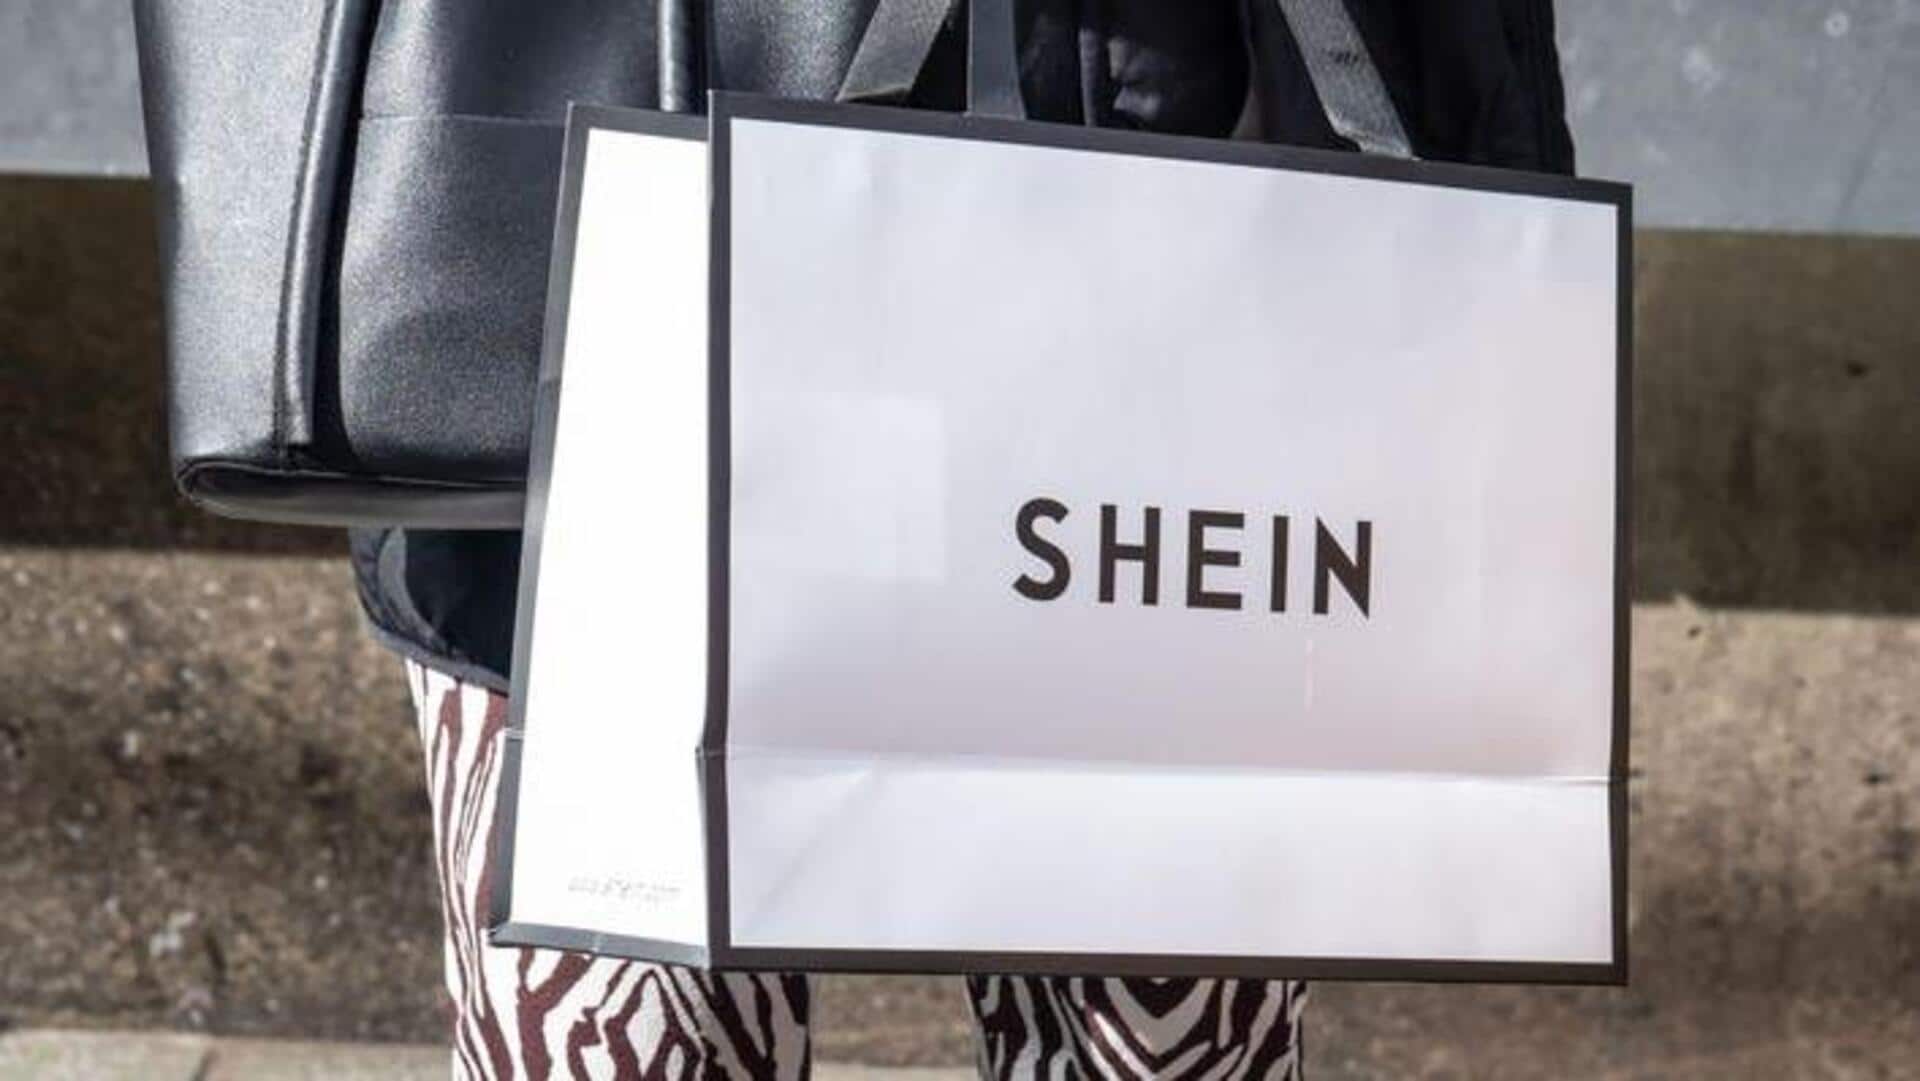 Shein aims for $90 billion valuation in US IPO